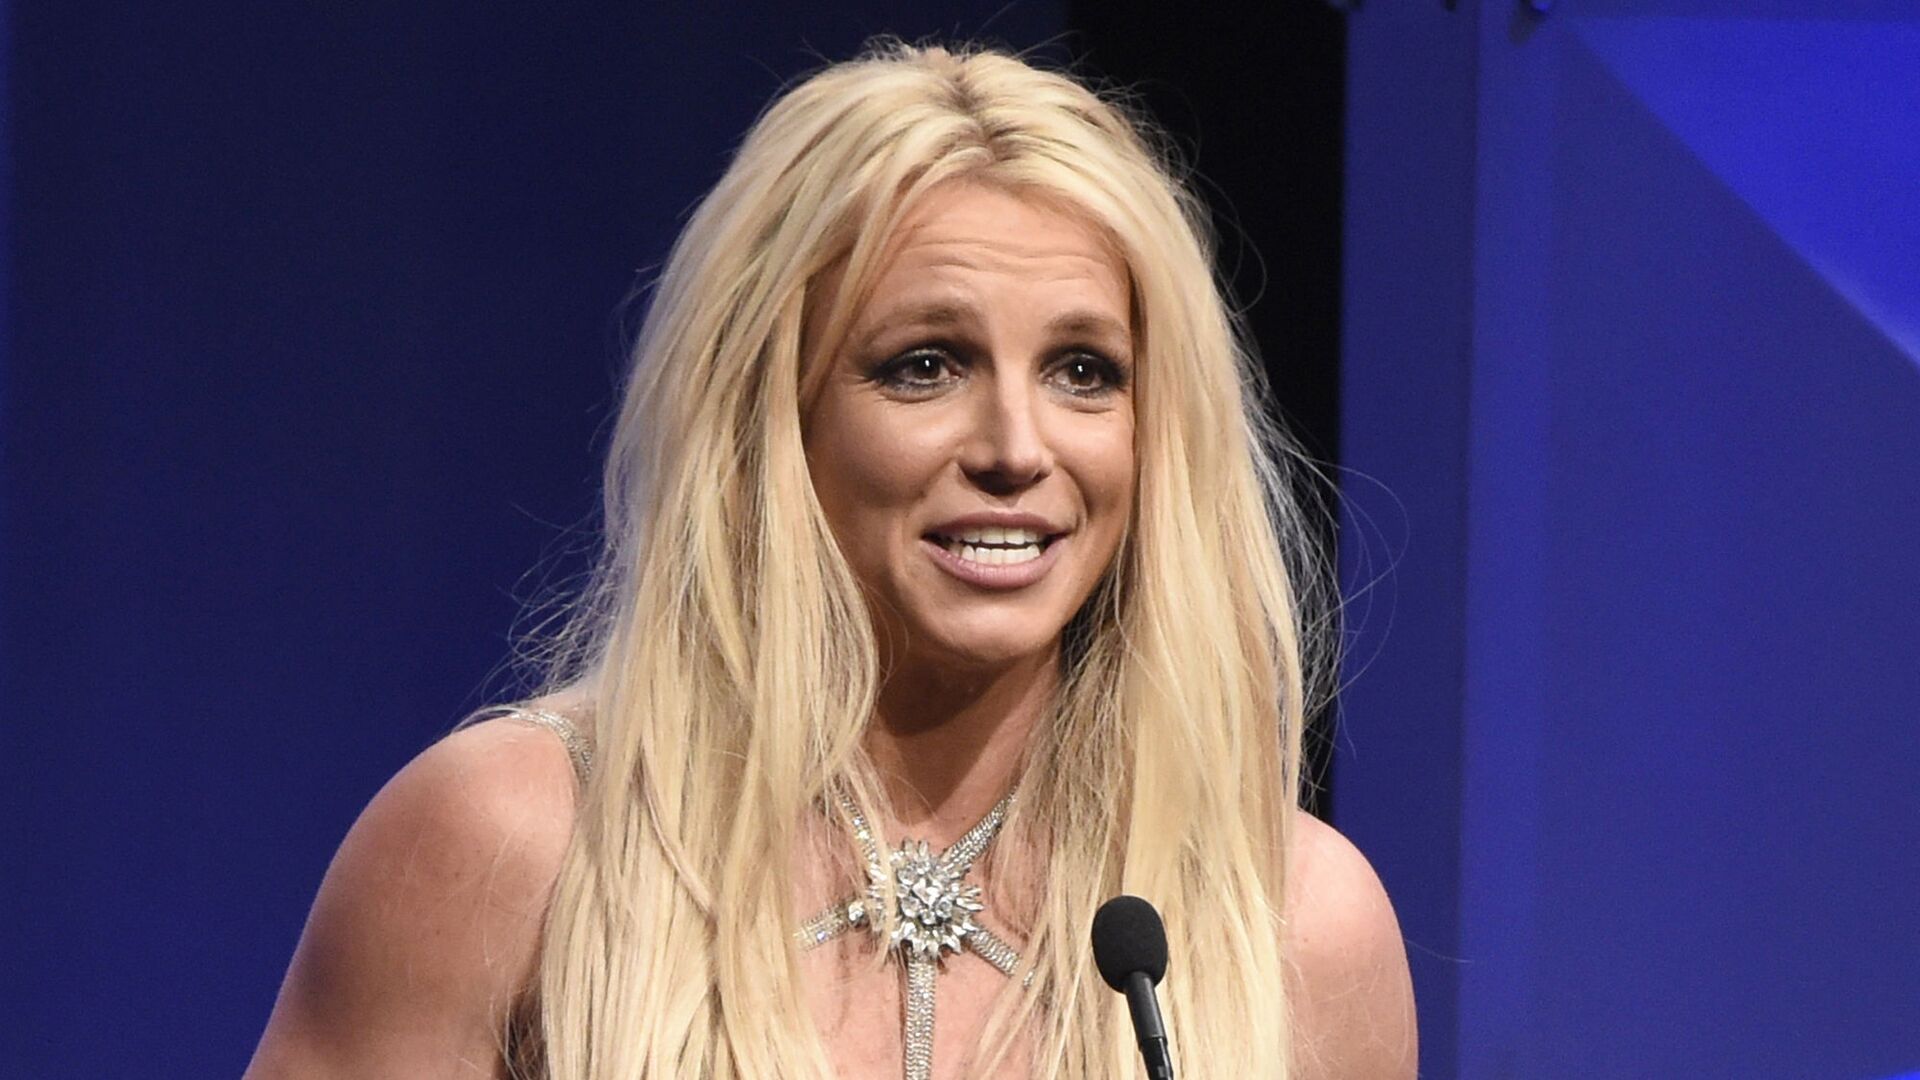 In this Thursday, April 12, 2018, file photo, Britney Spears accepts the Vanguard award at the 29th annual GLAAD Media Awards at the Beverly Hilton Hotel in Beverly Hills, Calif - Sputnik International, 1920, 19.03.2022